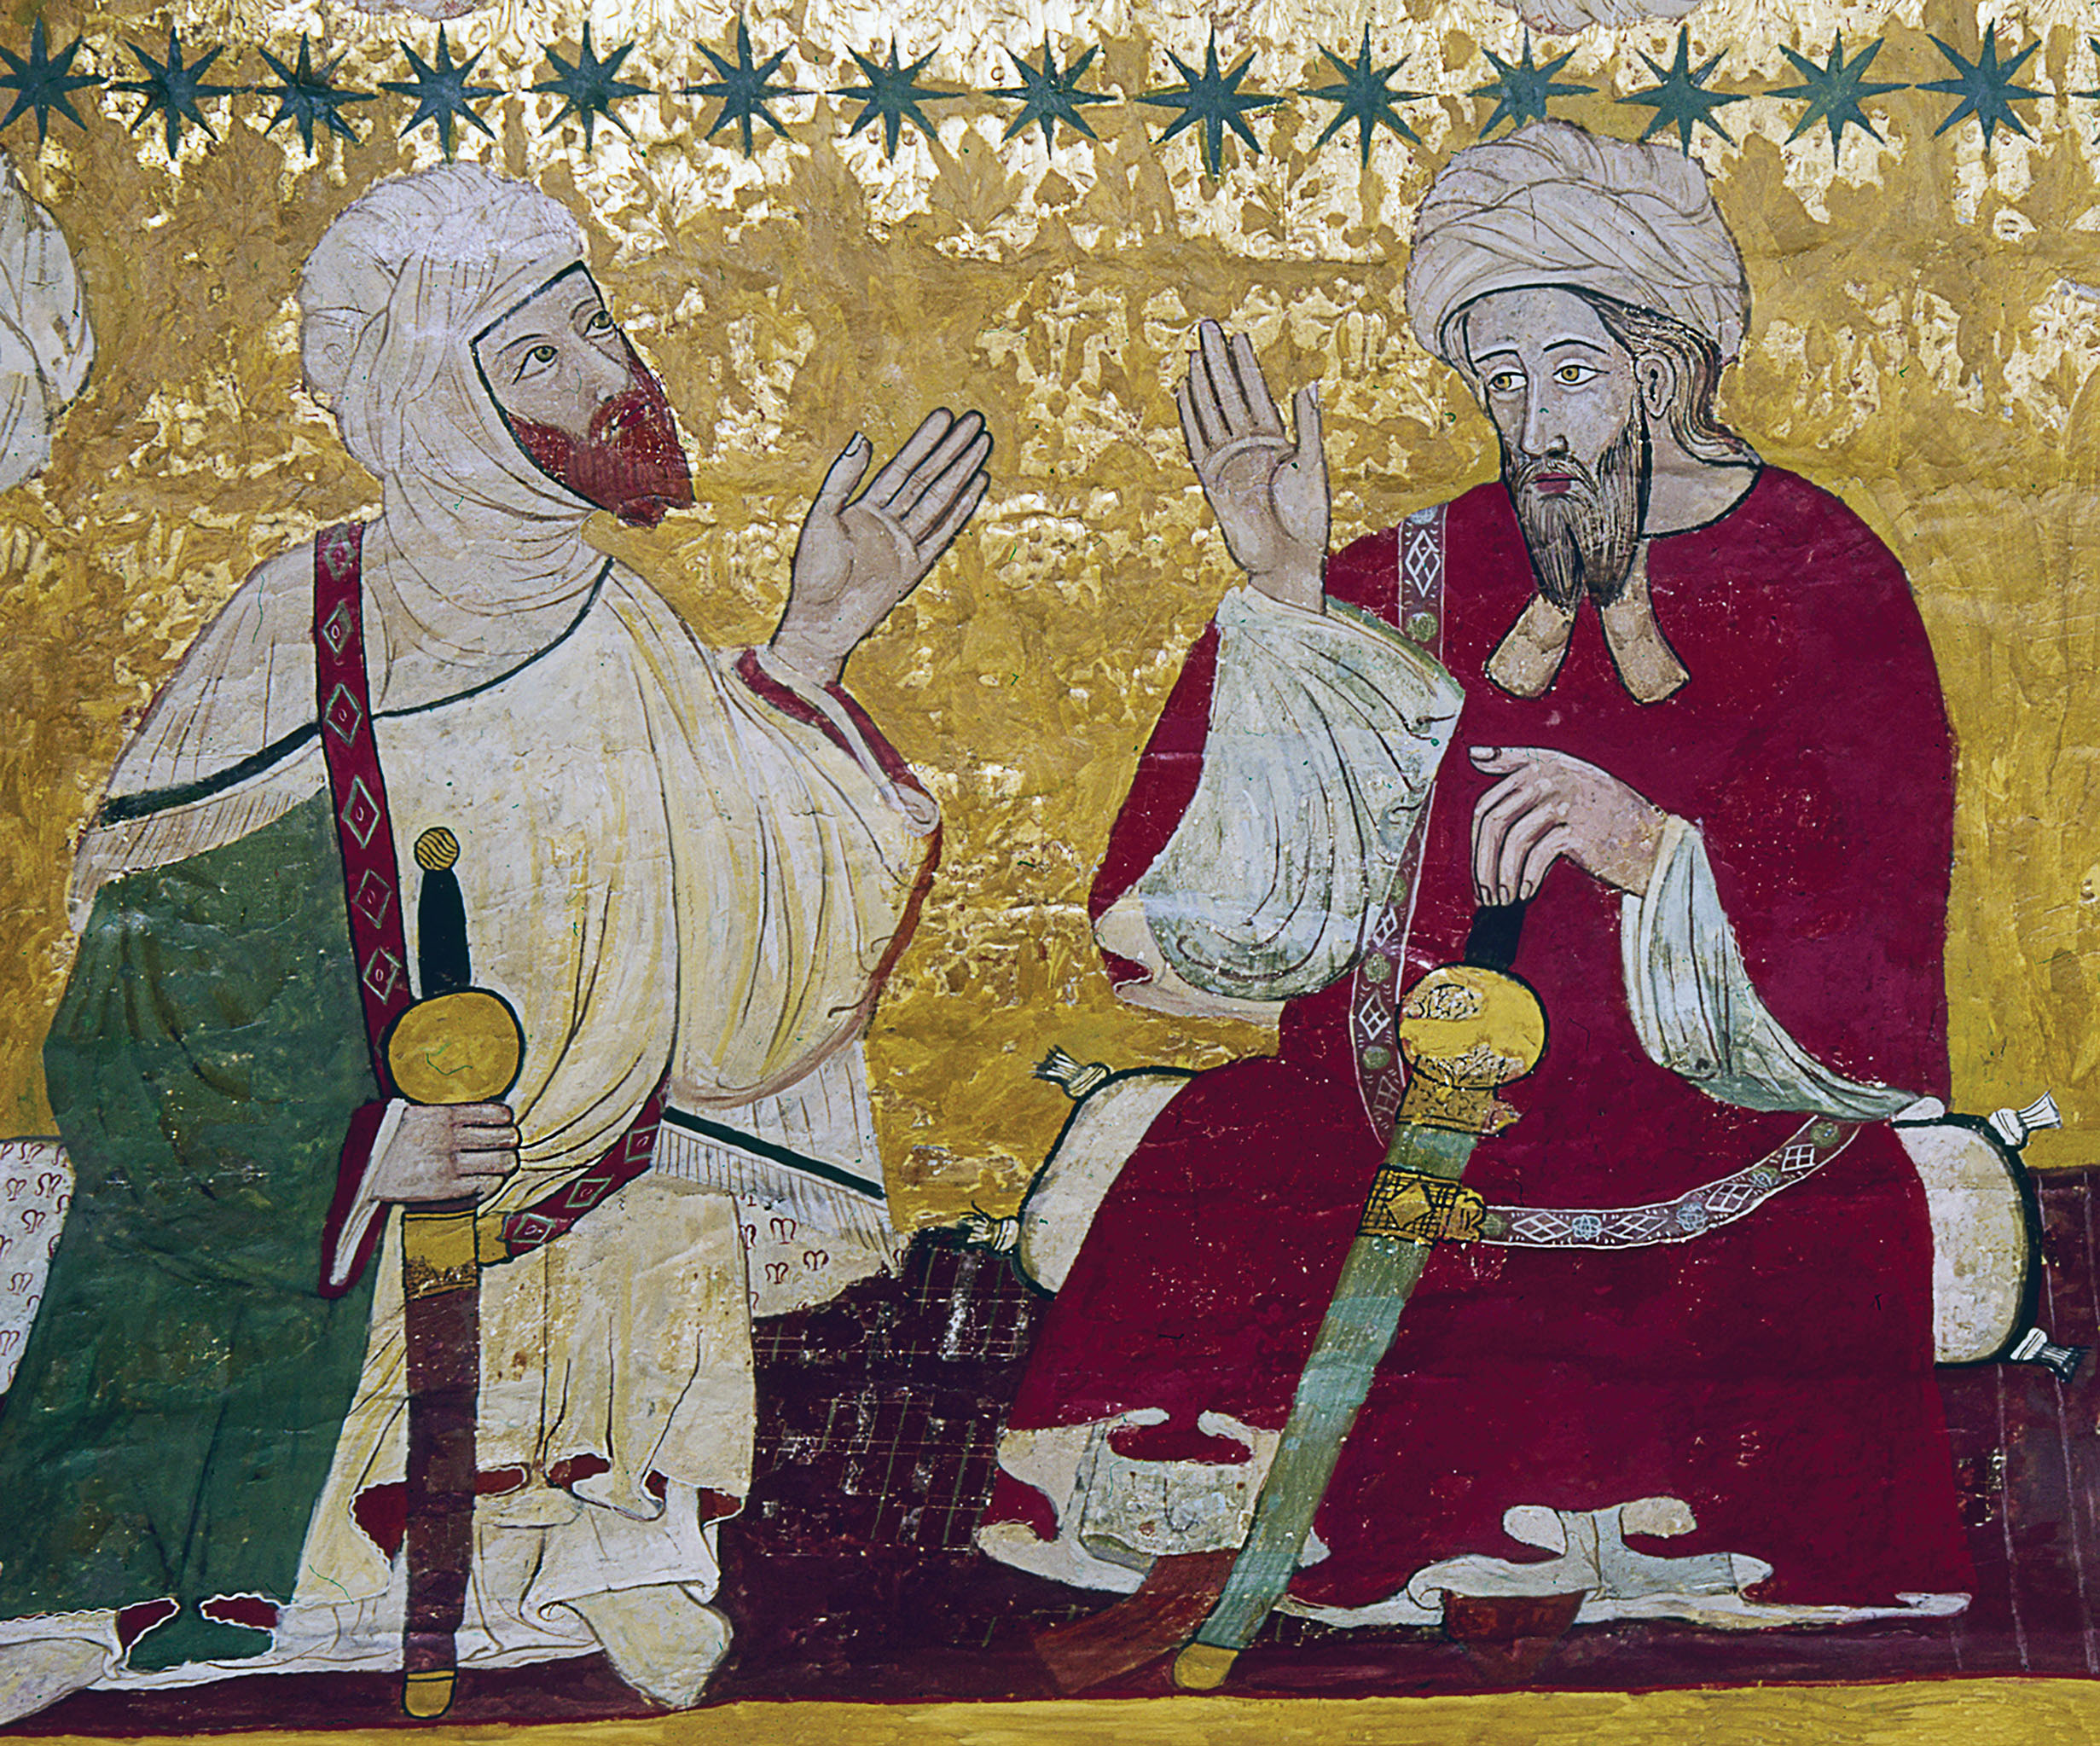 A circa 1375 painting on the leather ceiling of the Sala de Los Reyes, at the Alhambra palace in Granada, Spain, depicts Moors in conversation / Granger